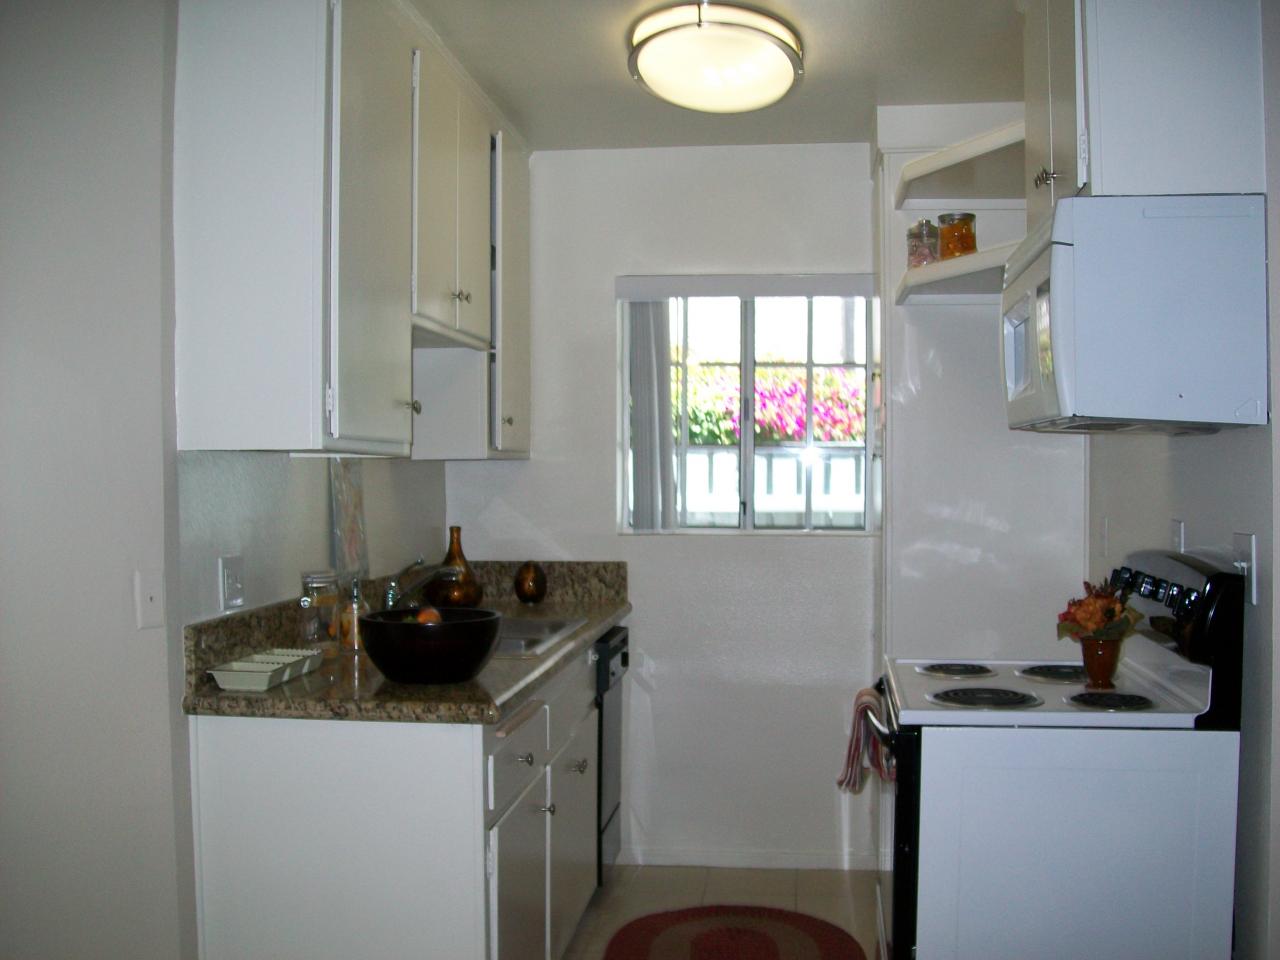 Photo of Kingsbury Villas Apartments - another view of a kitchen overview